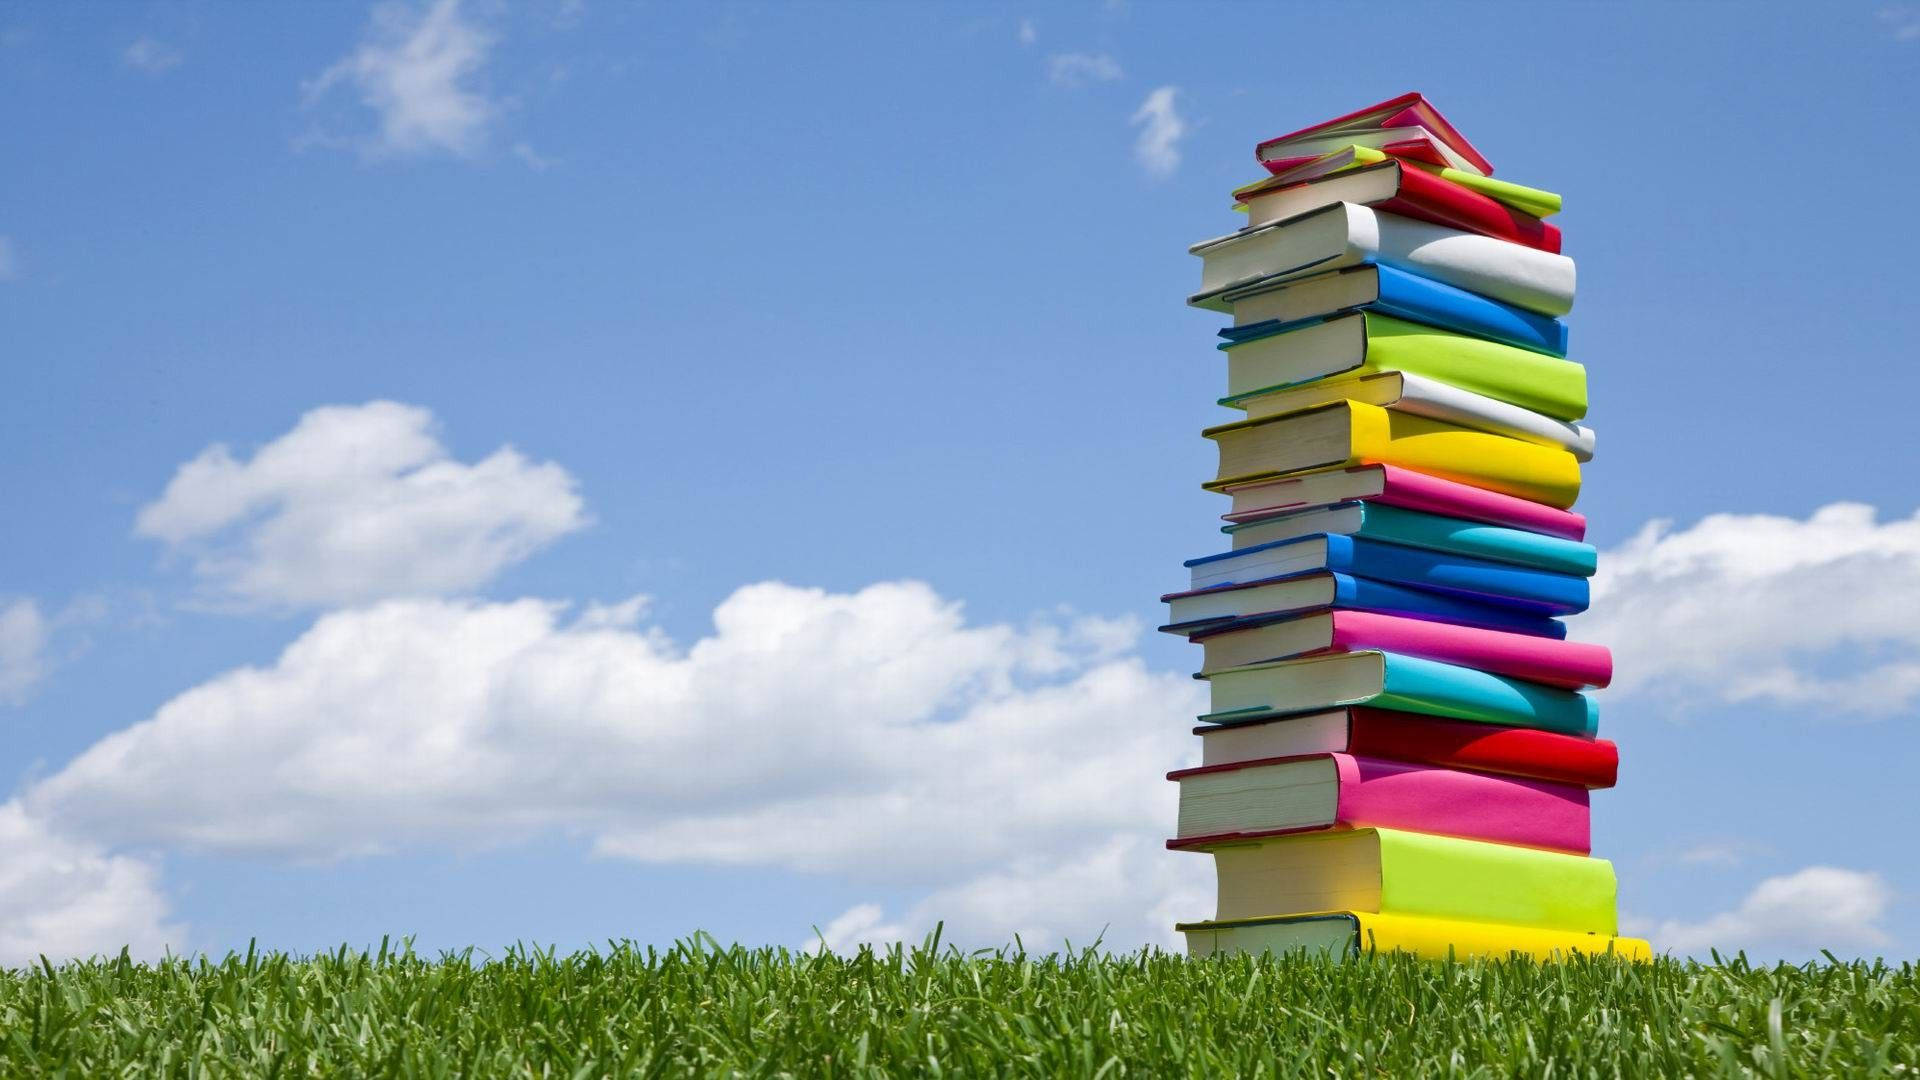 Colorful stack of books placed outside wallpaper